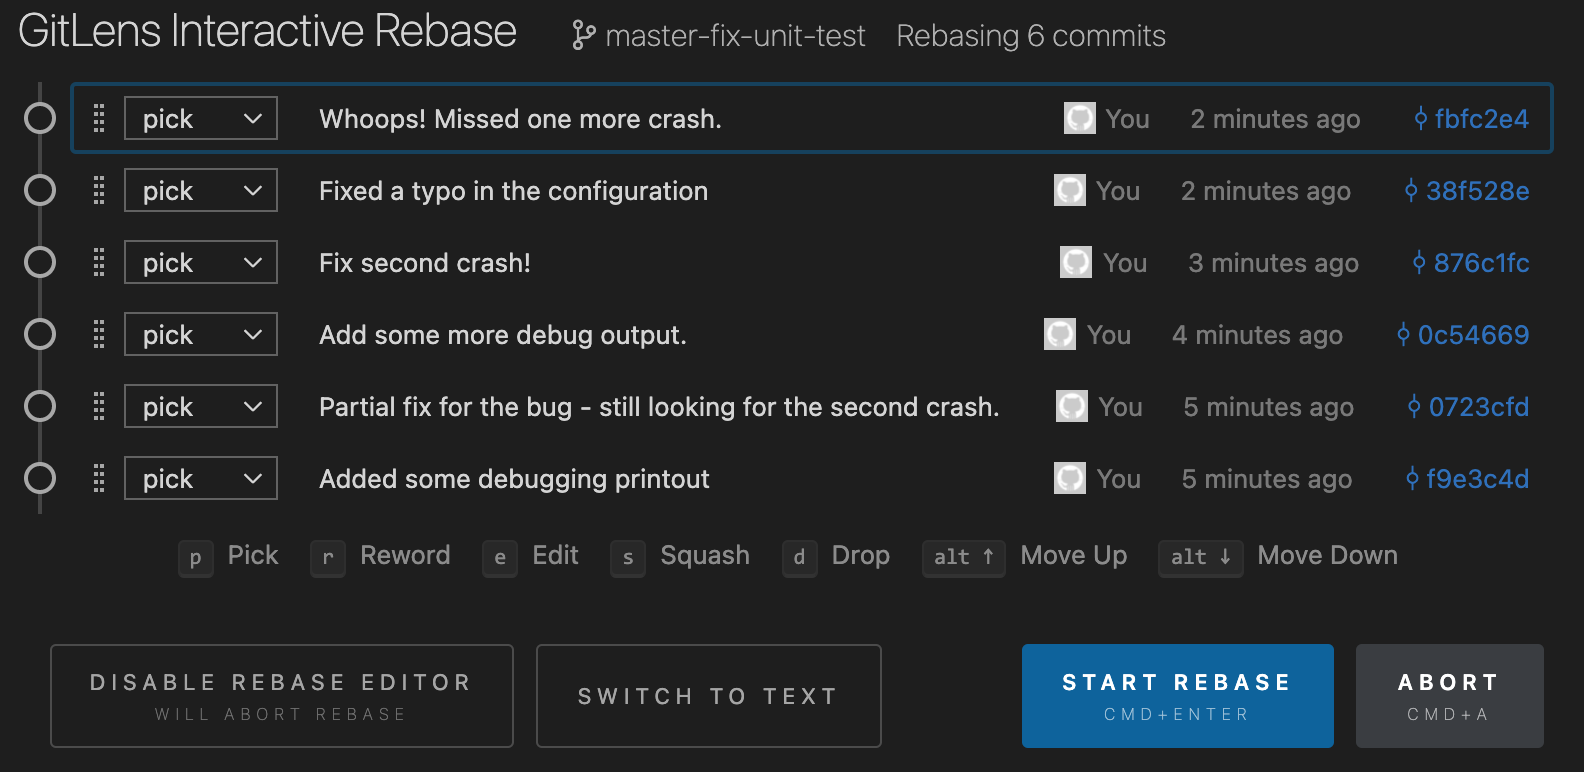 The interactive rebase GUI before any changes are made